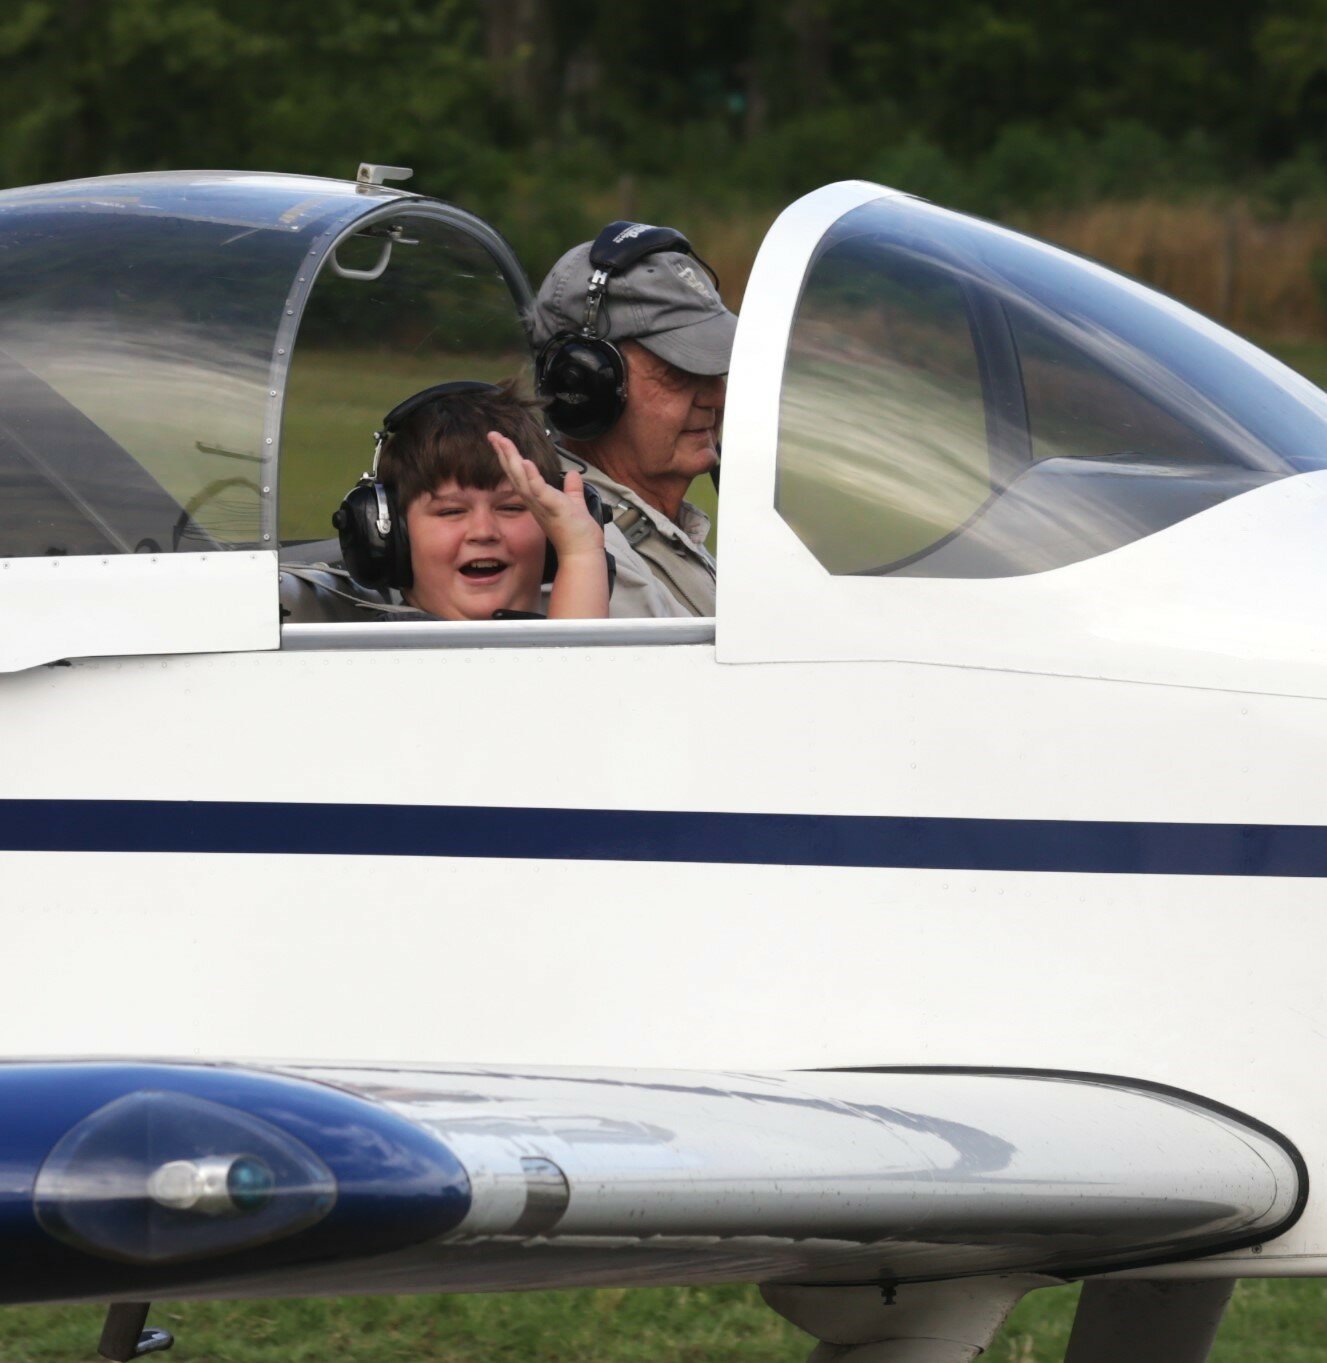 An enthusiastic co-pilot prepares to line-up for take-off.